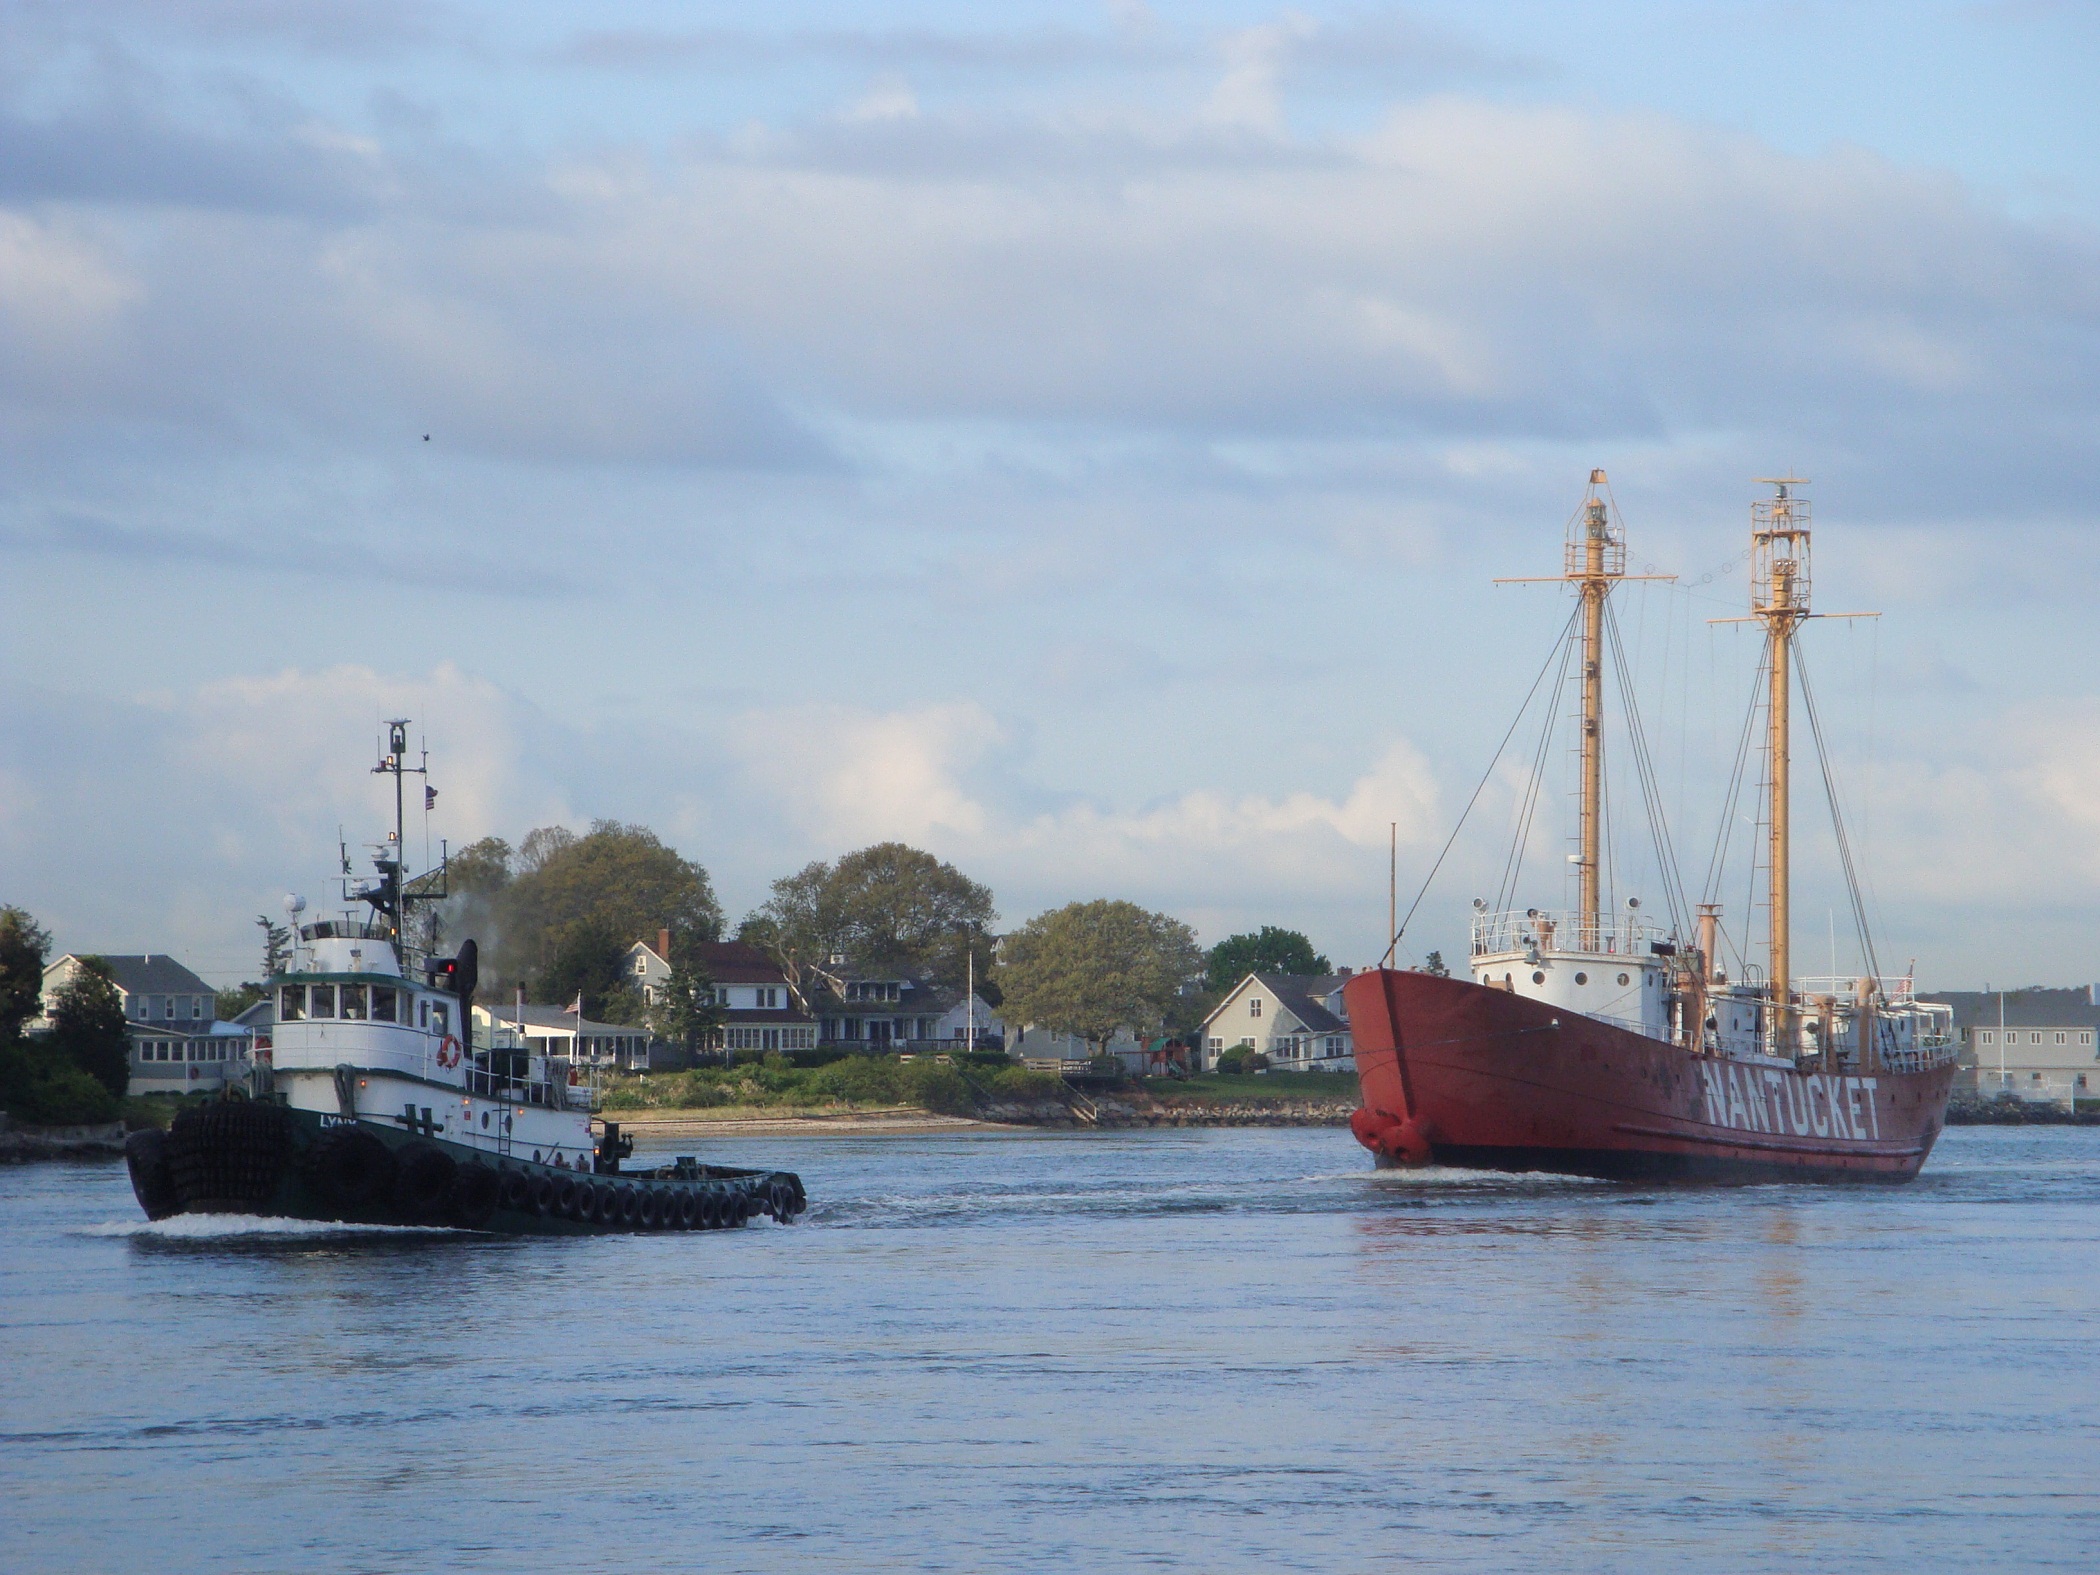 Nantucket Lightship Entering Ccc (user submitted)